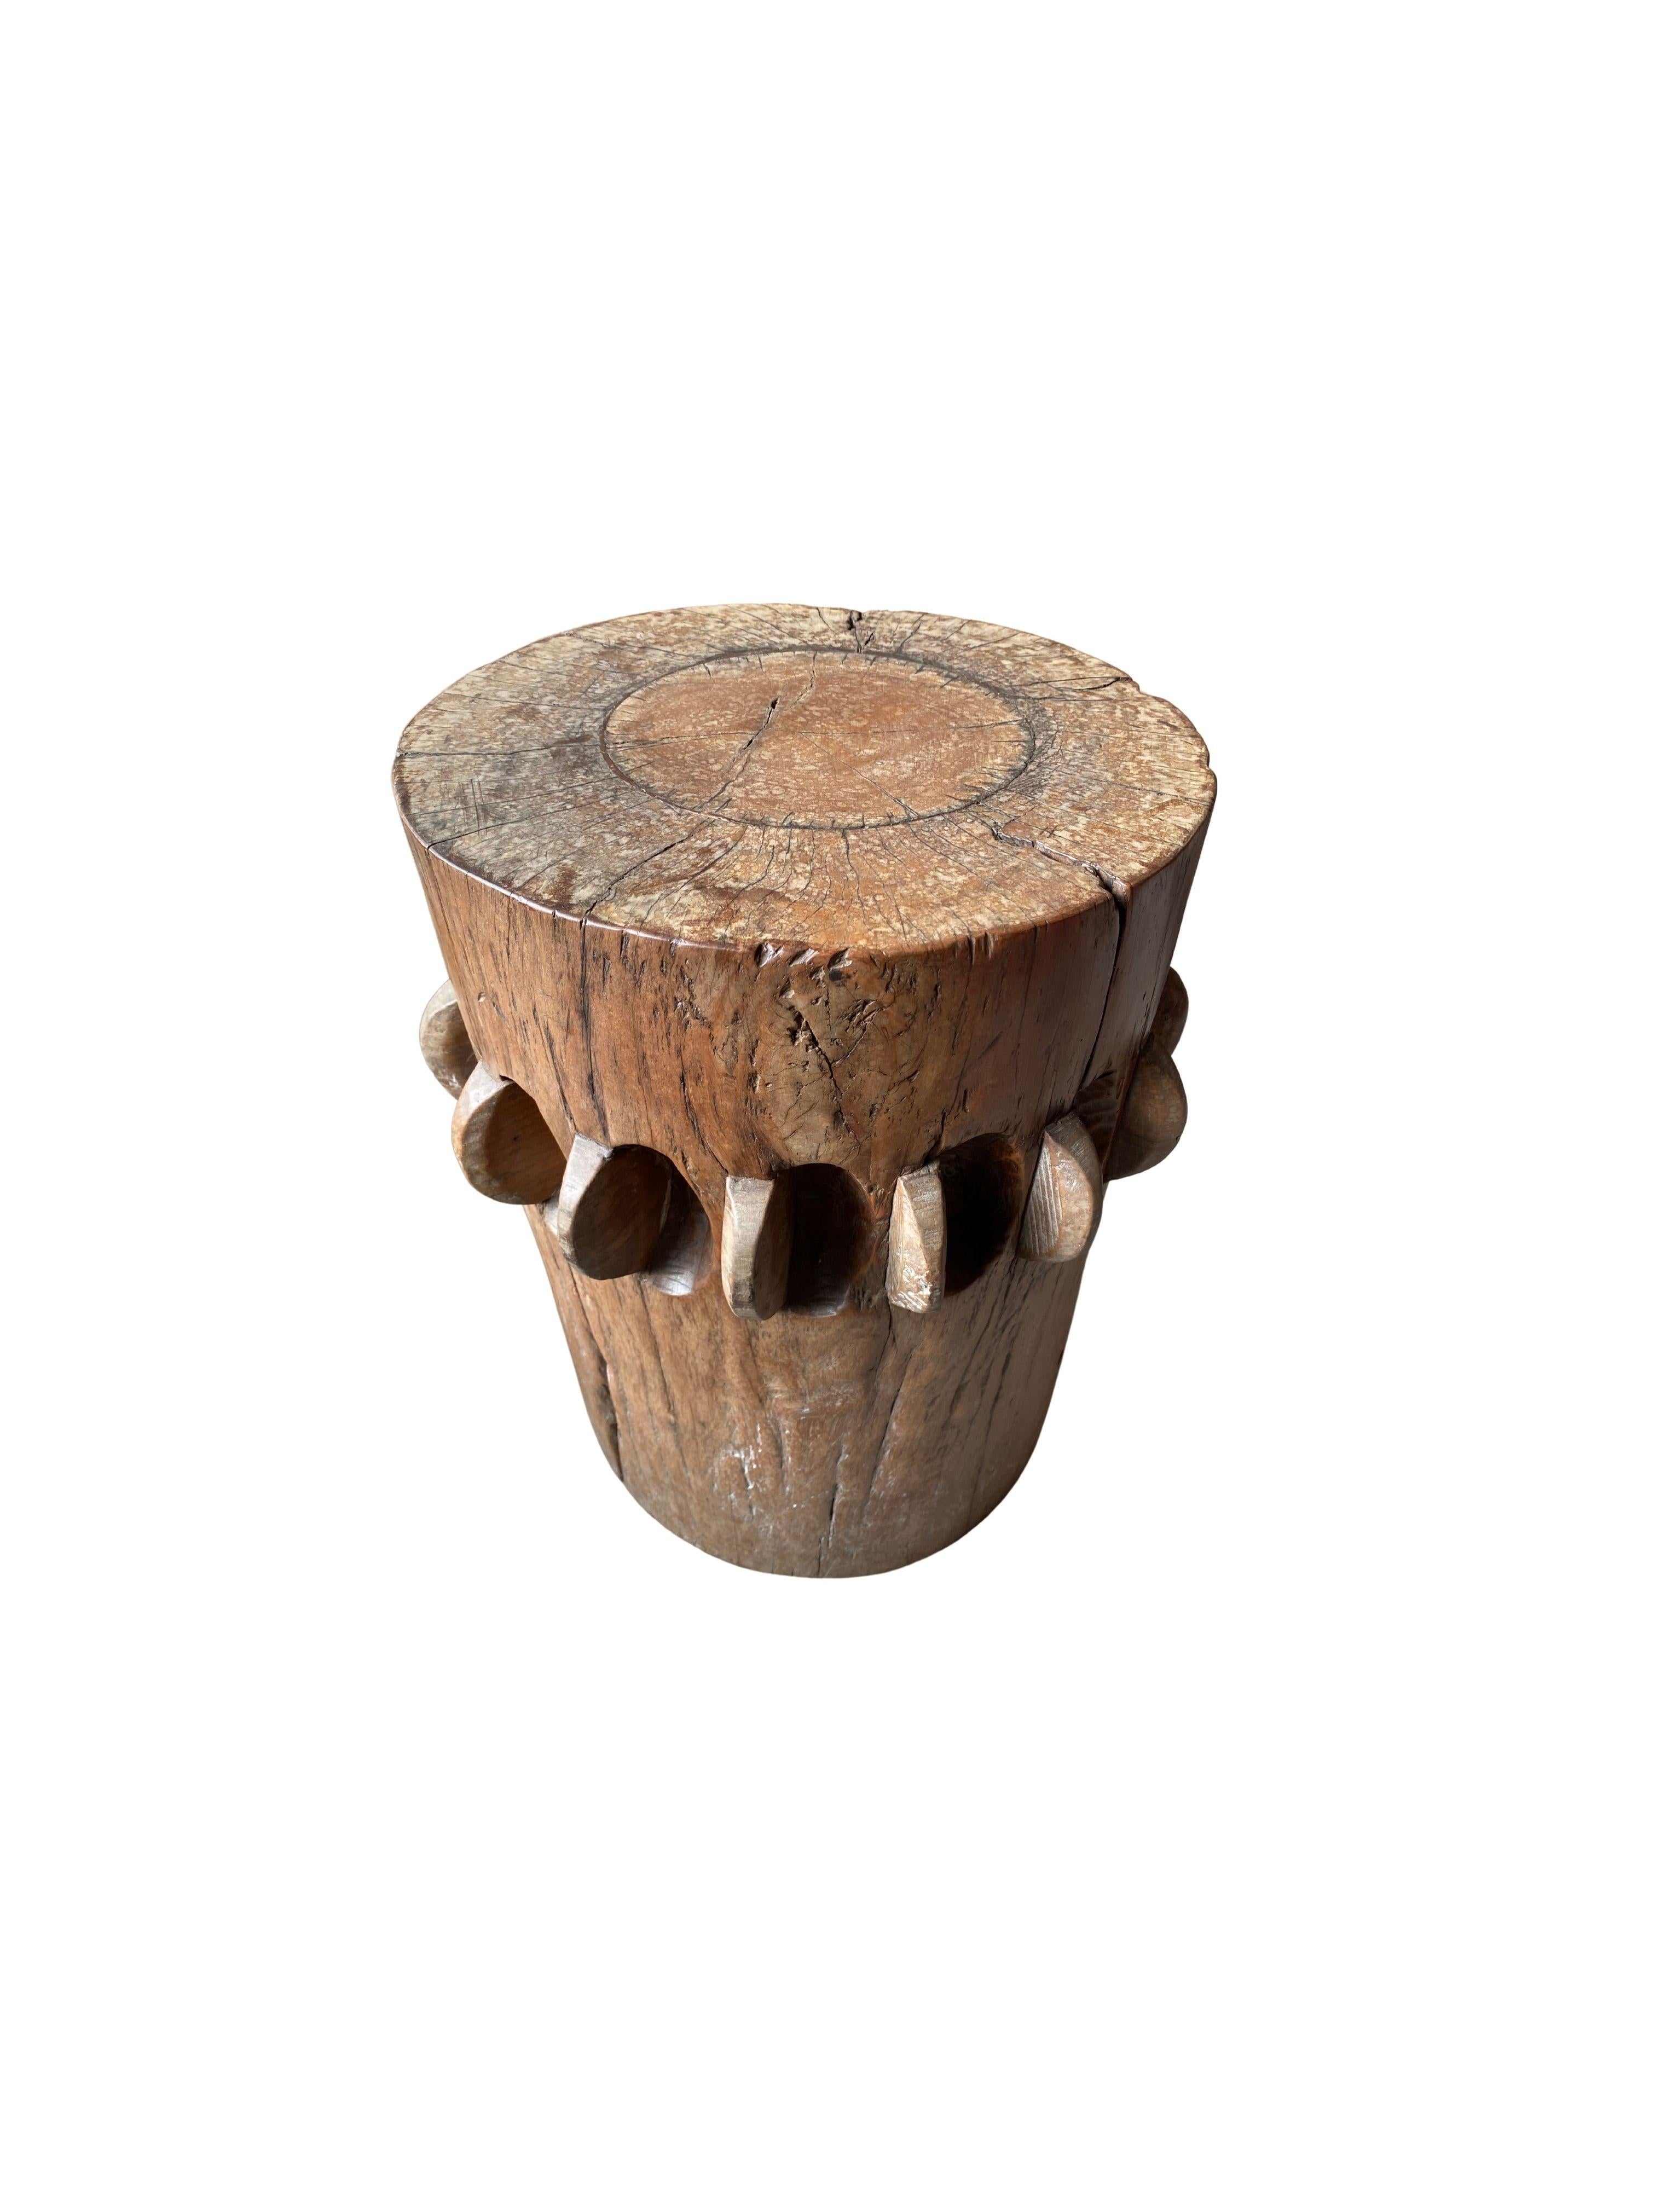 This solid crusher was part of a larger sugar cane press extracting the sugar rich juices from harvested sugar cane. Hand-carved from teak It has a smooth finish and would make for a wonderful pedestal, side table or as a sculptural object on